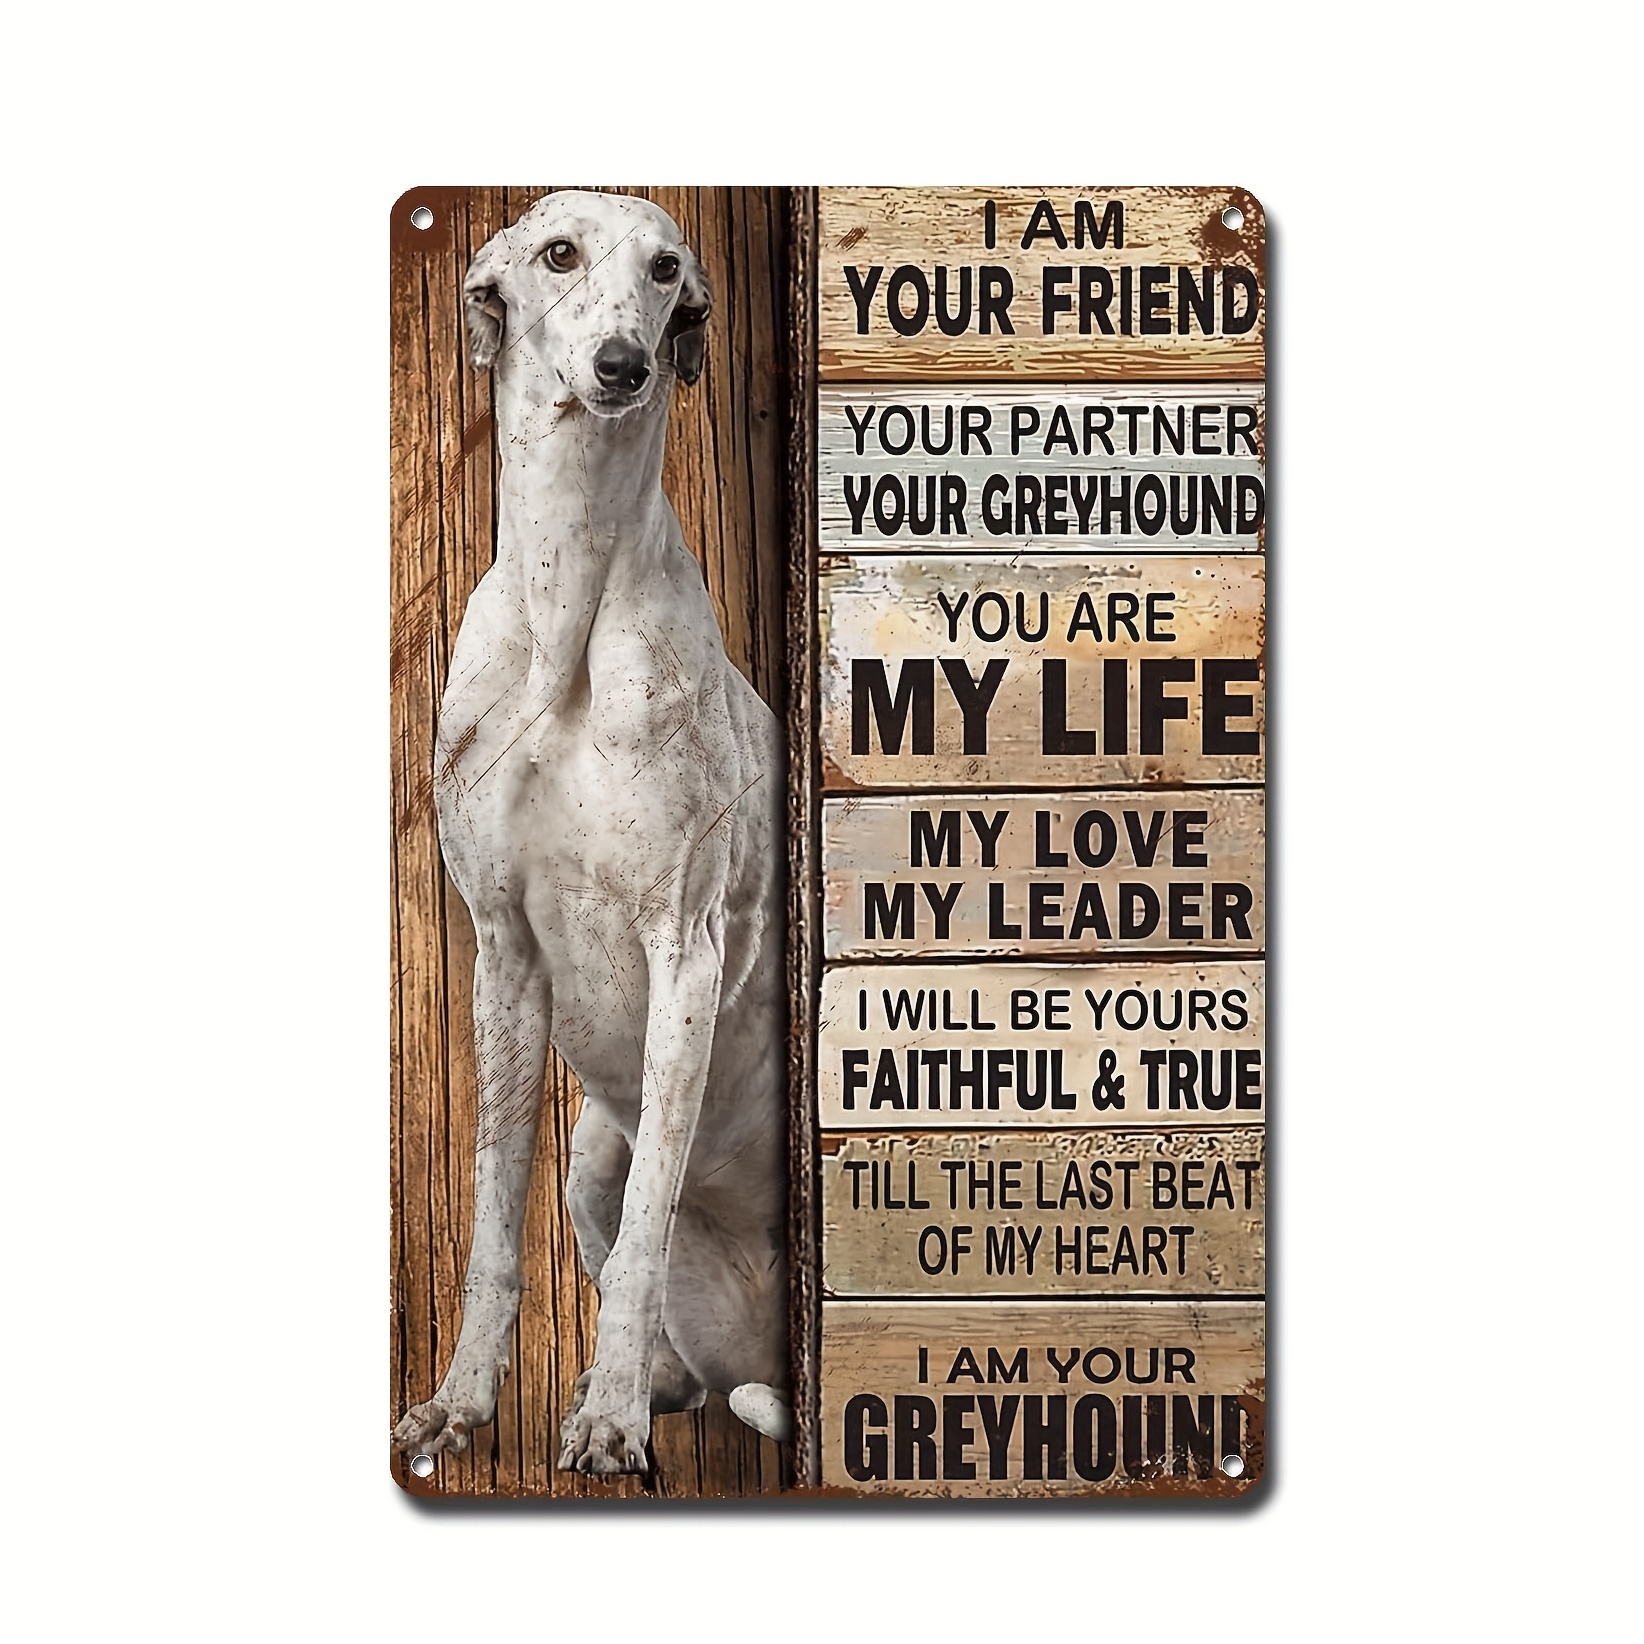 

Metal Greyhound Wall Art Sign - Multipurpose Tin Garden Plaque With English Language - Your Friend & Partner Tribute - Ideal For Bar Décor - 8x12 Inches - Easy Wall Hanging With Pre-drilled Holes